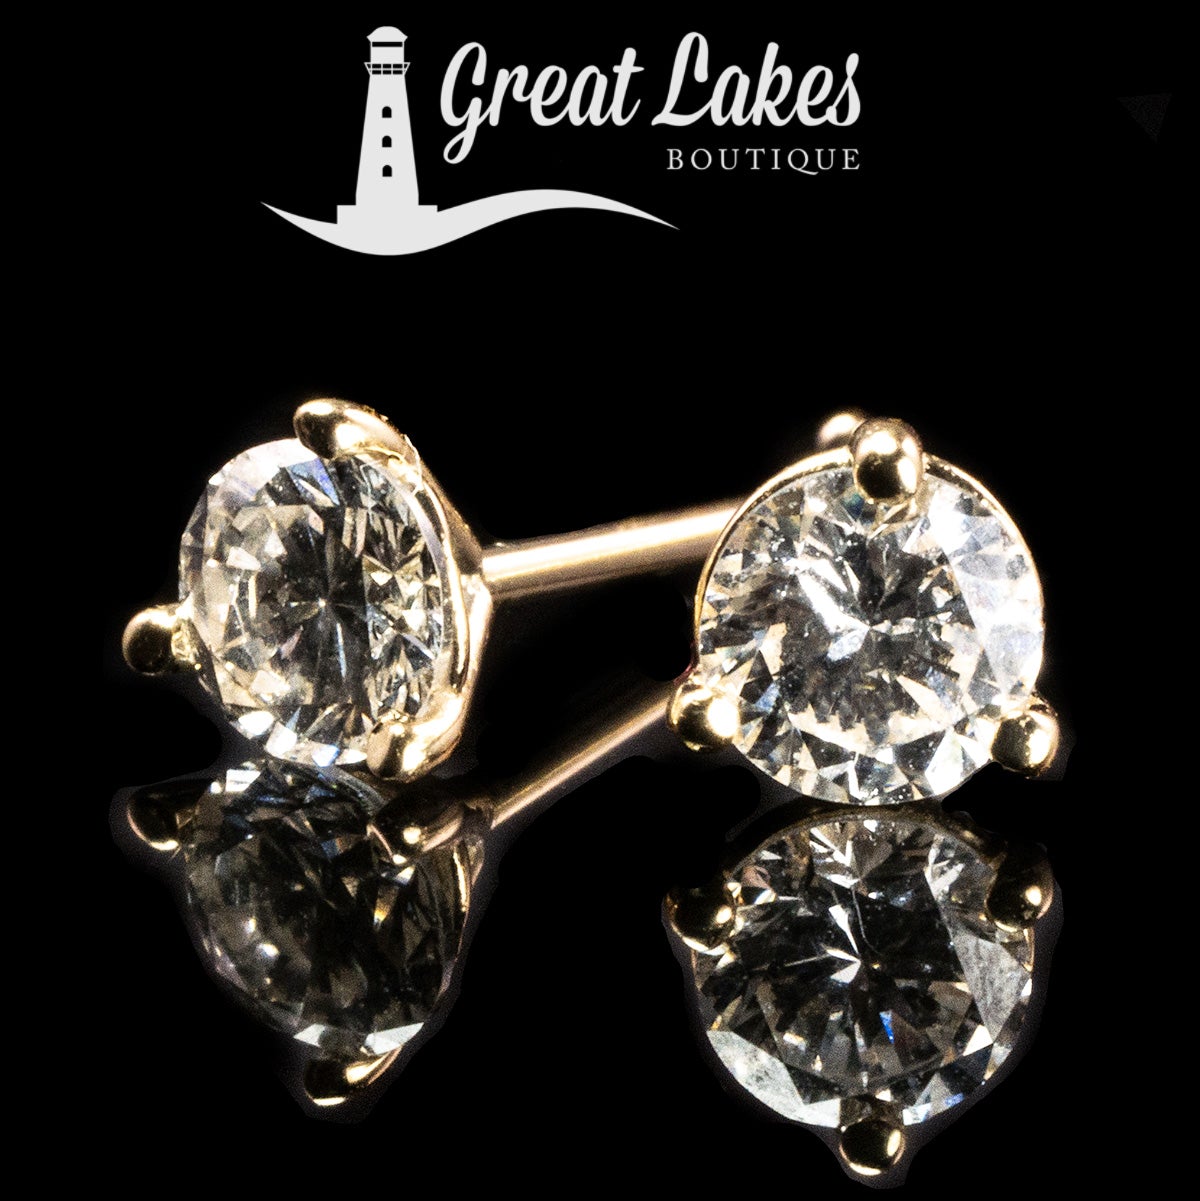 Great Lakes Boutique Yellow Gold Diamond Studs